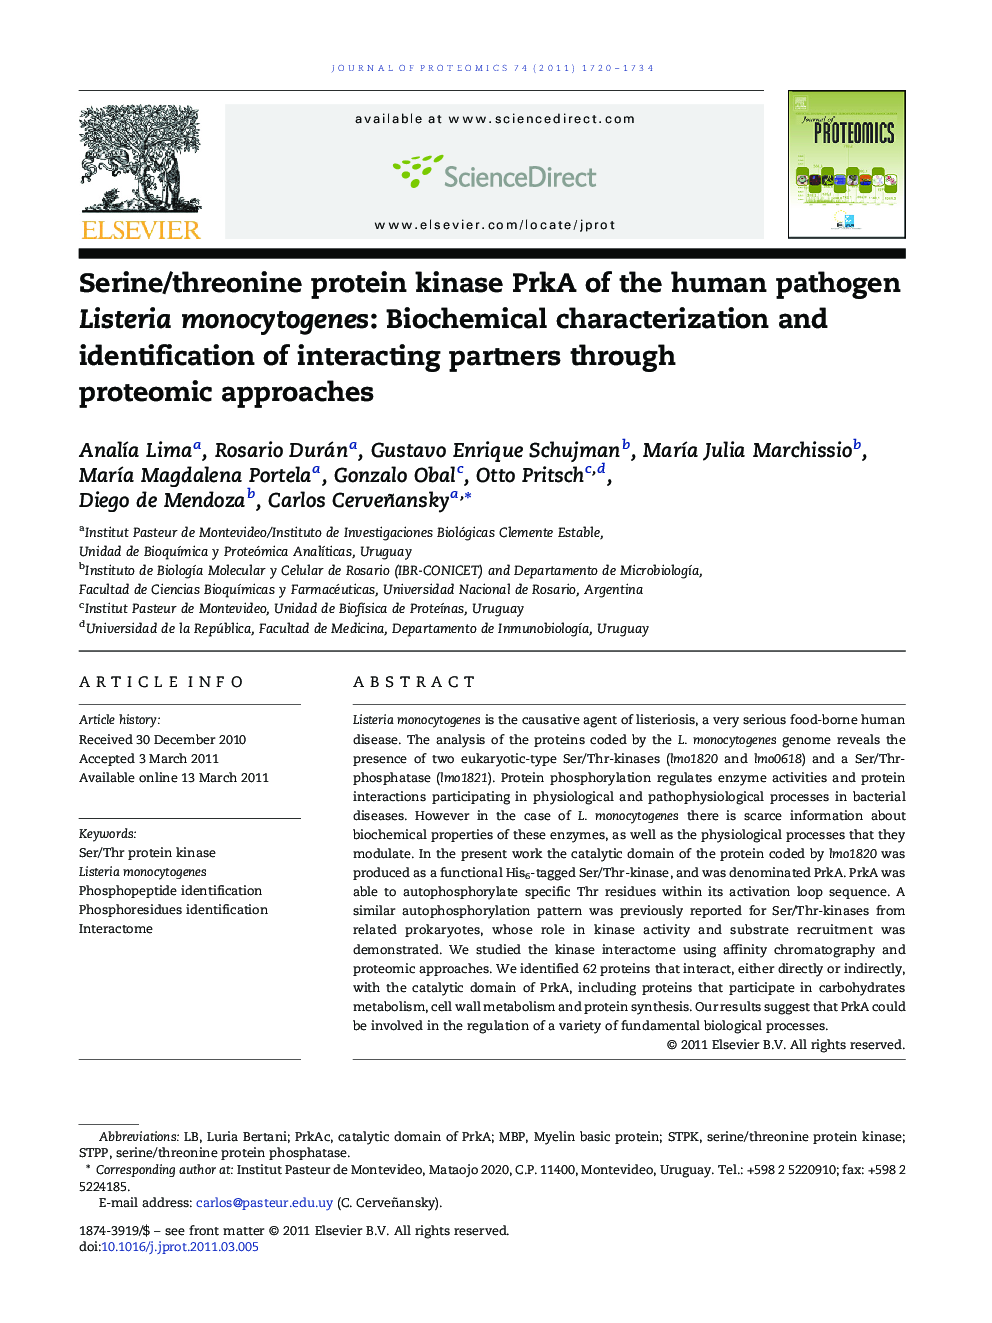 Serine/threonine protein kinase PrkA of the human pathogen Listeria monocytogenes: Biochemical characterization and identification of interacting partners through proteomic approaches